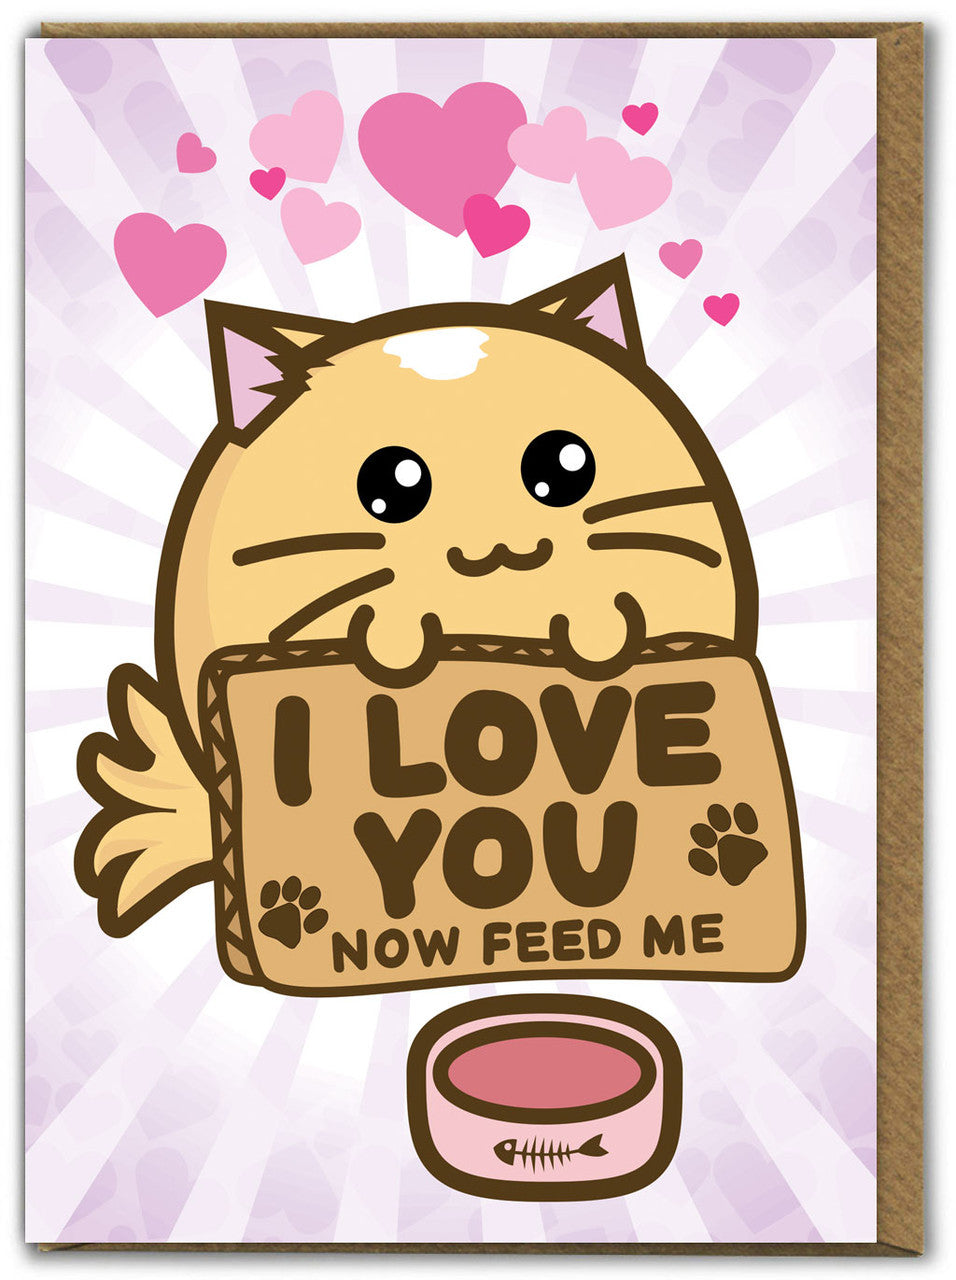 A kawaii cat greetings card where a cat with big eyes is holding a sign saying 'I Love you now feed me'.